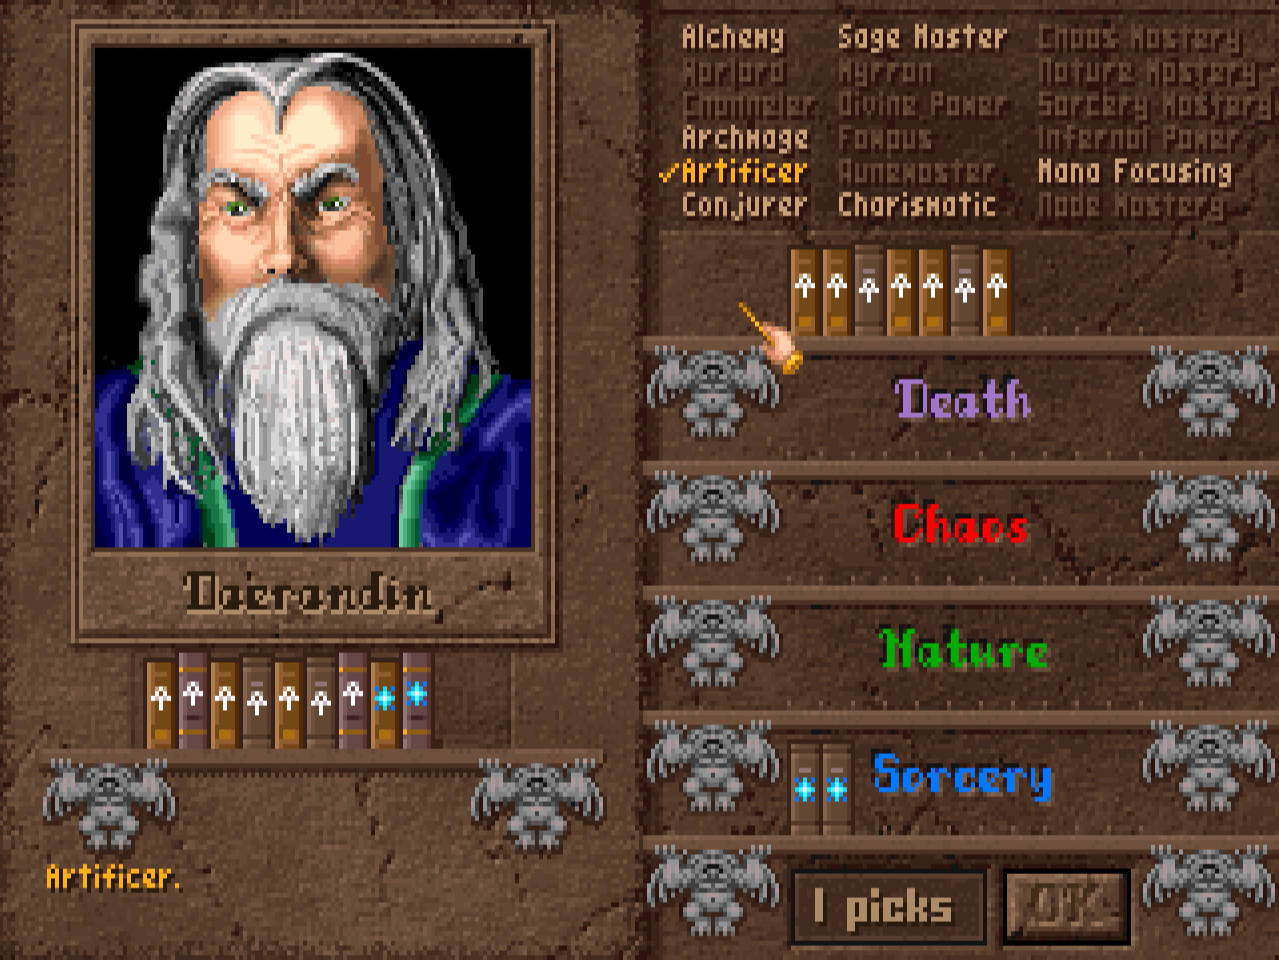 Wizard customization upon starting a new game